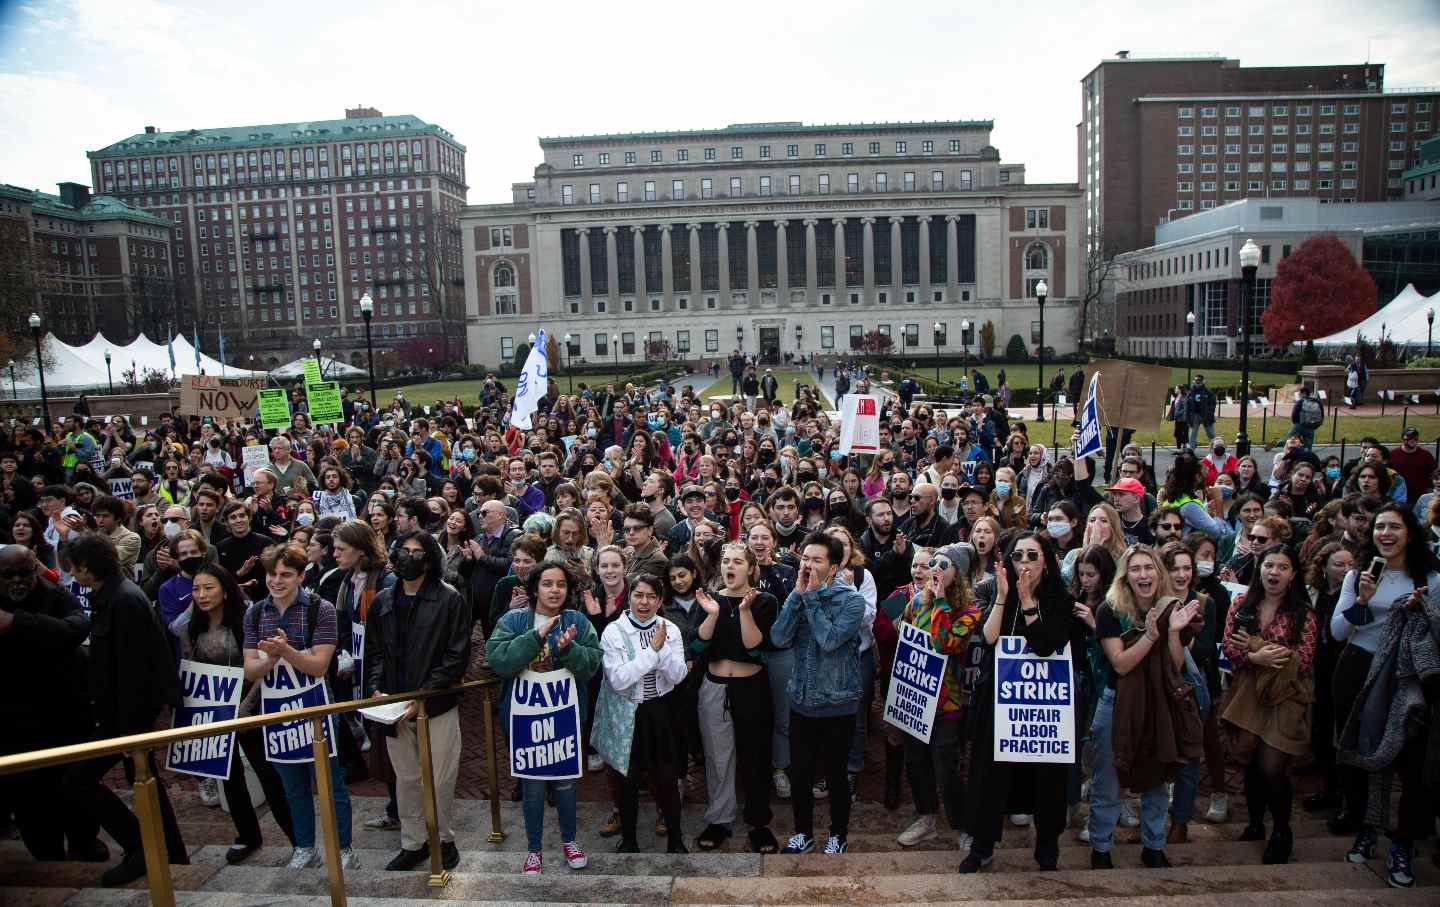 https://www.thenation.com/wp-content/uploads/2022/01/Columbia-Faculty-Protests.jpg